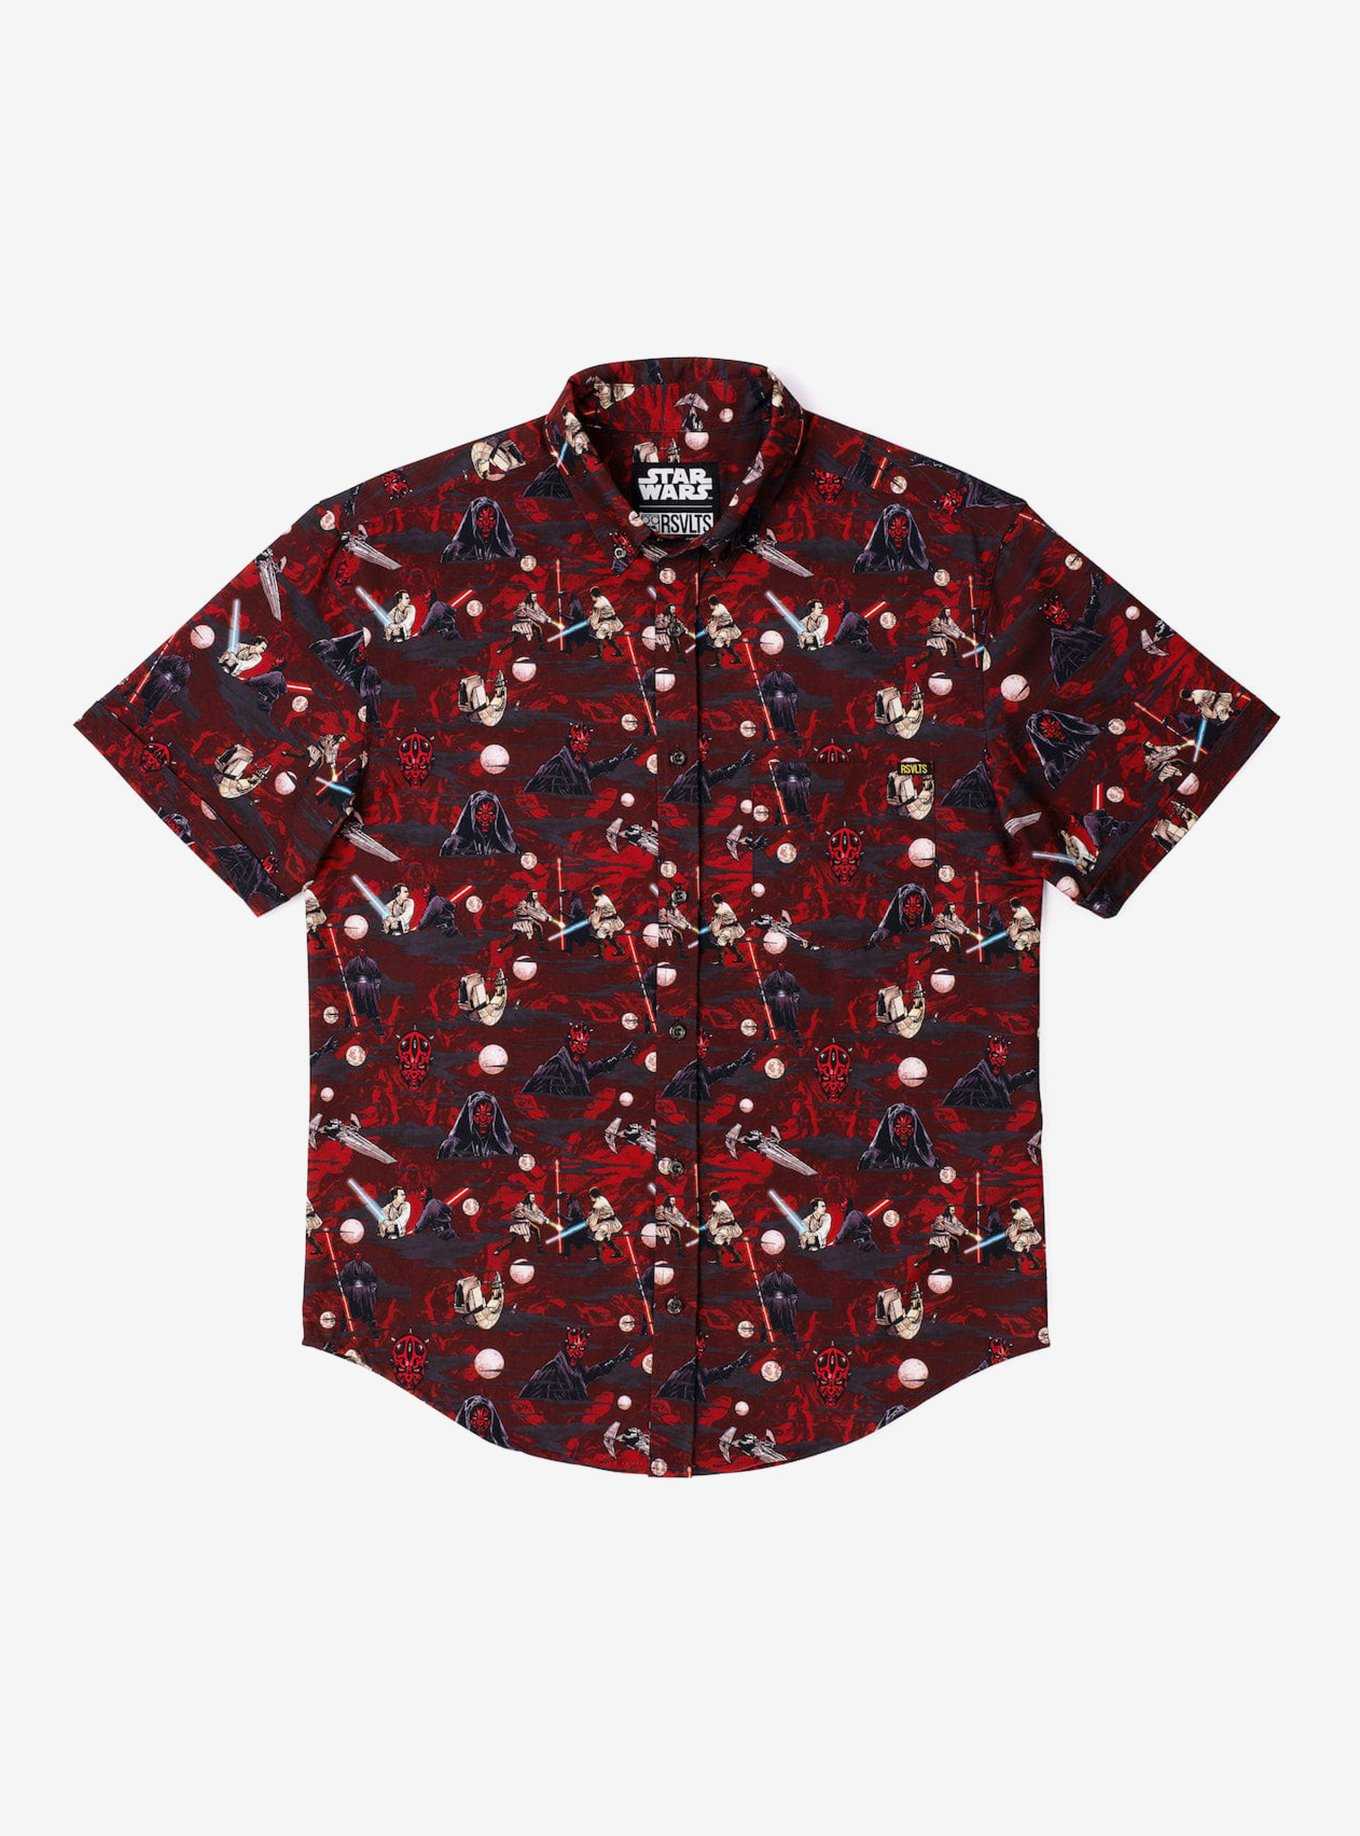 RSVLTS Star Wars "The Force & The Phantom"Button Up Top, , hi-res